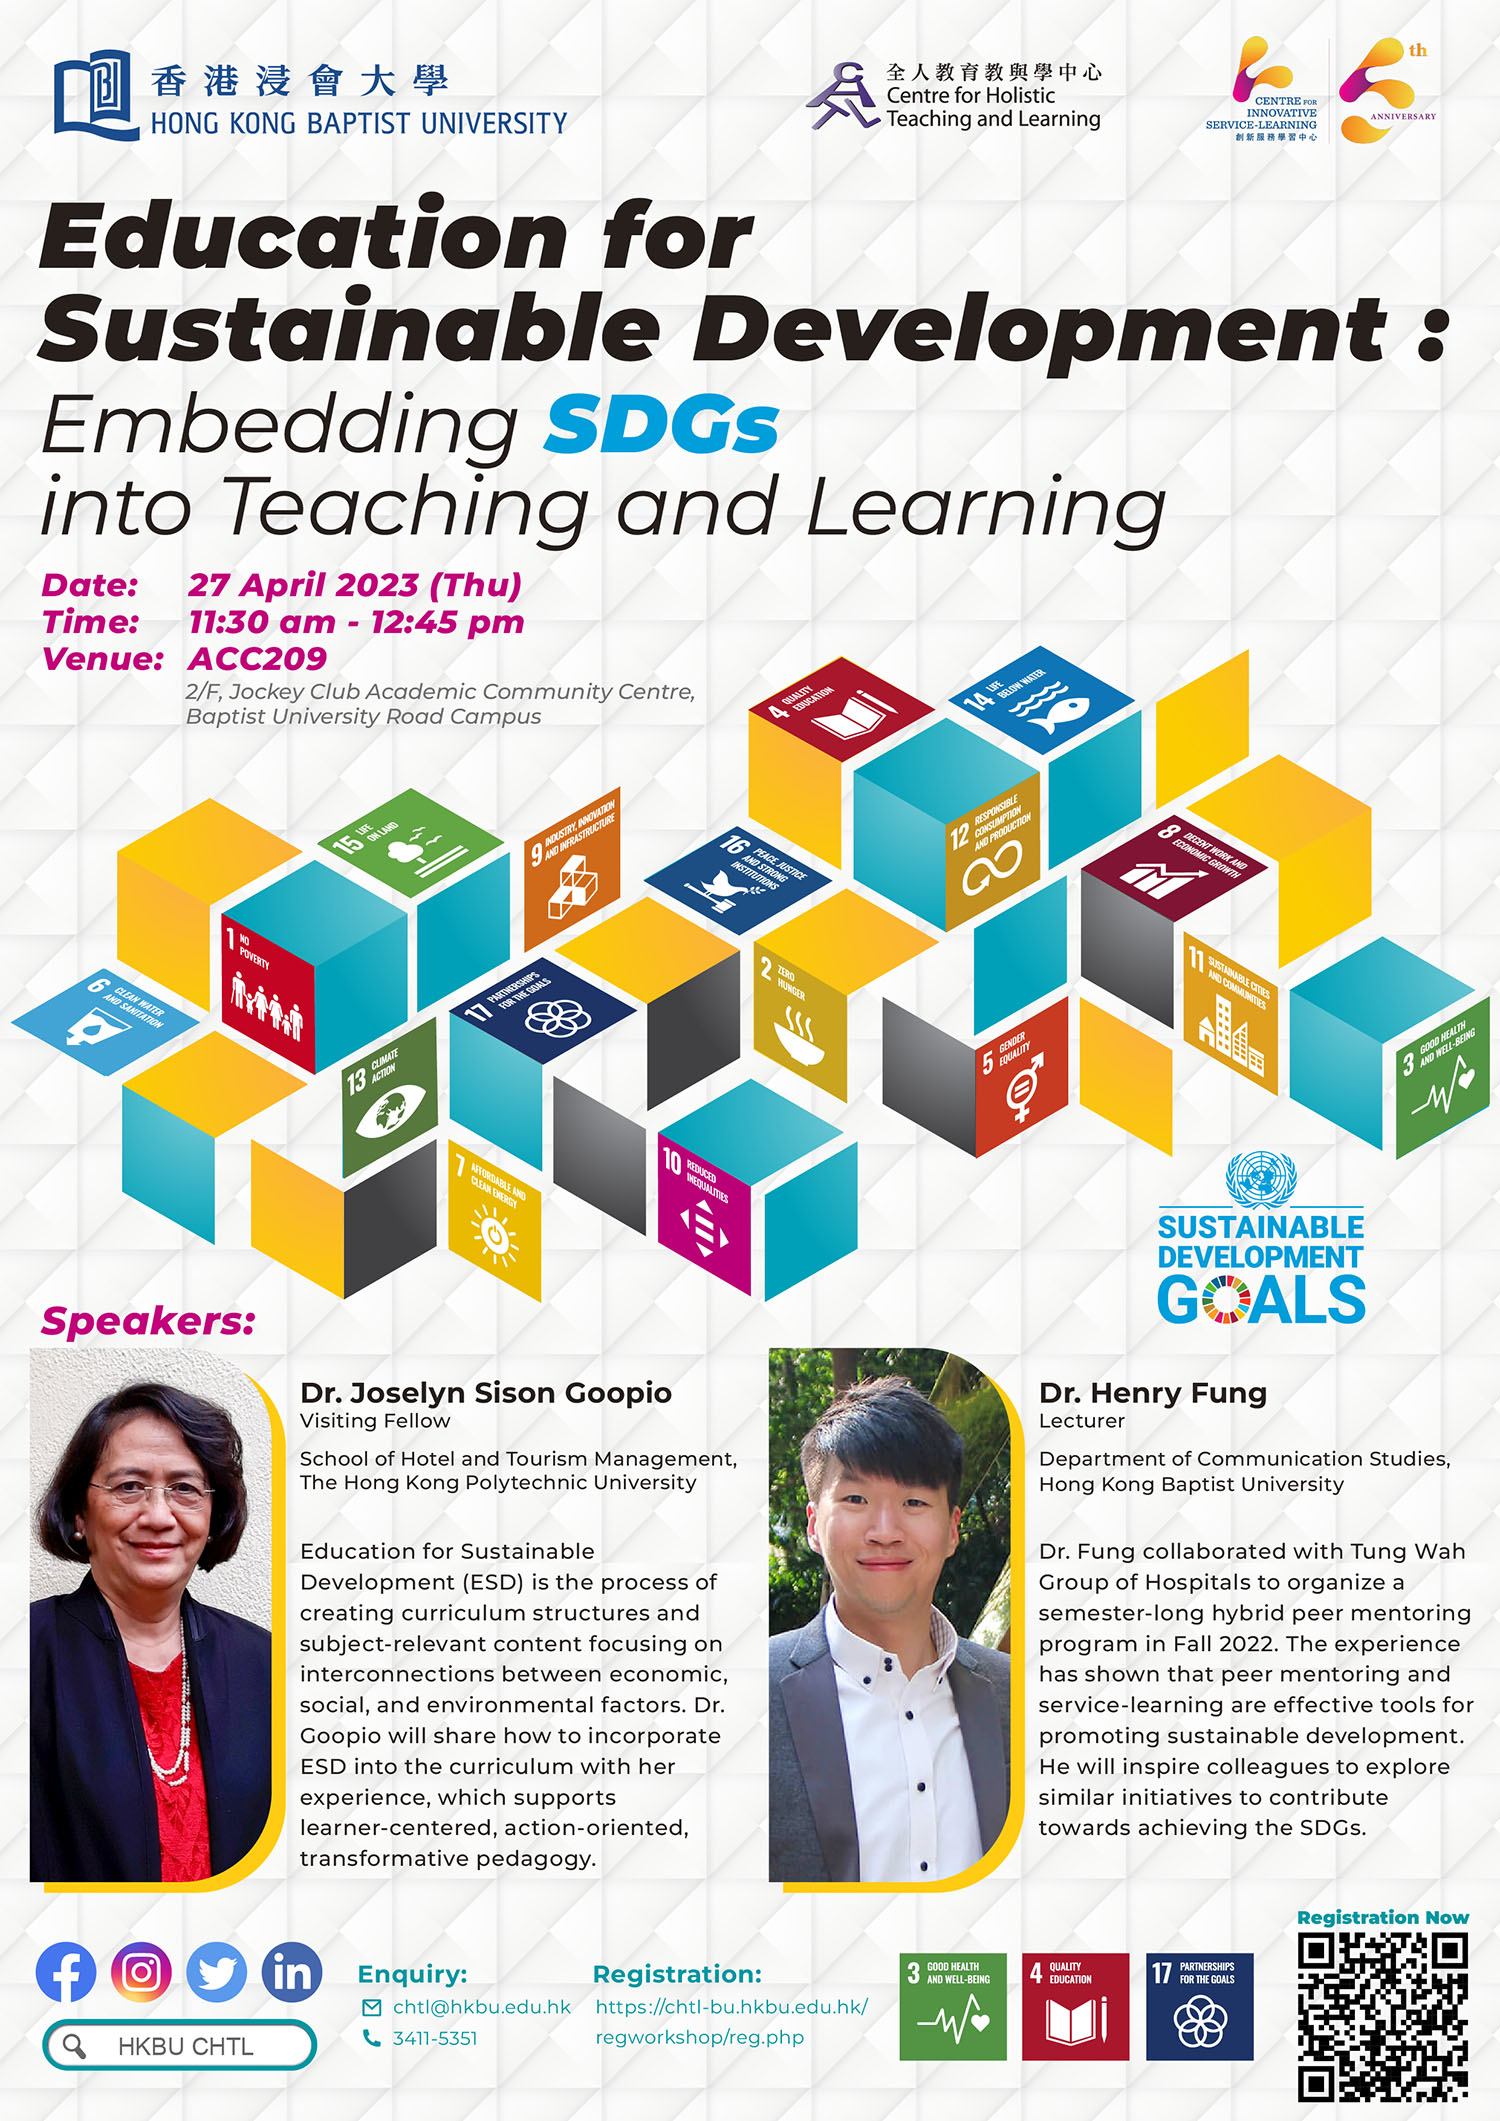 Education for Sustainable Development: Embedding SDGs into Teaching and Learning